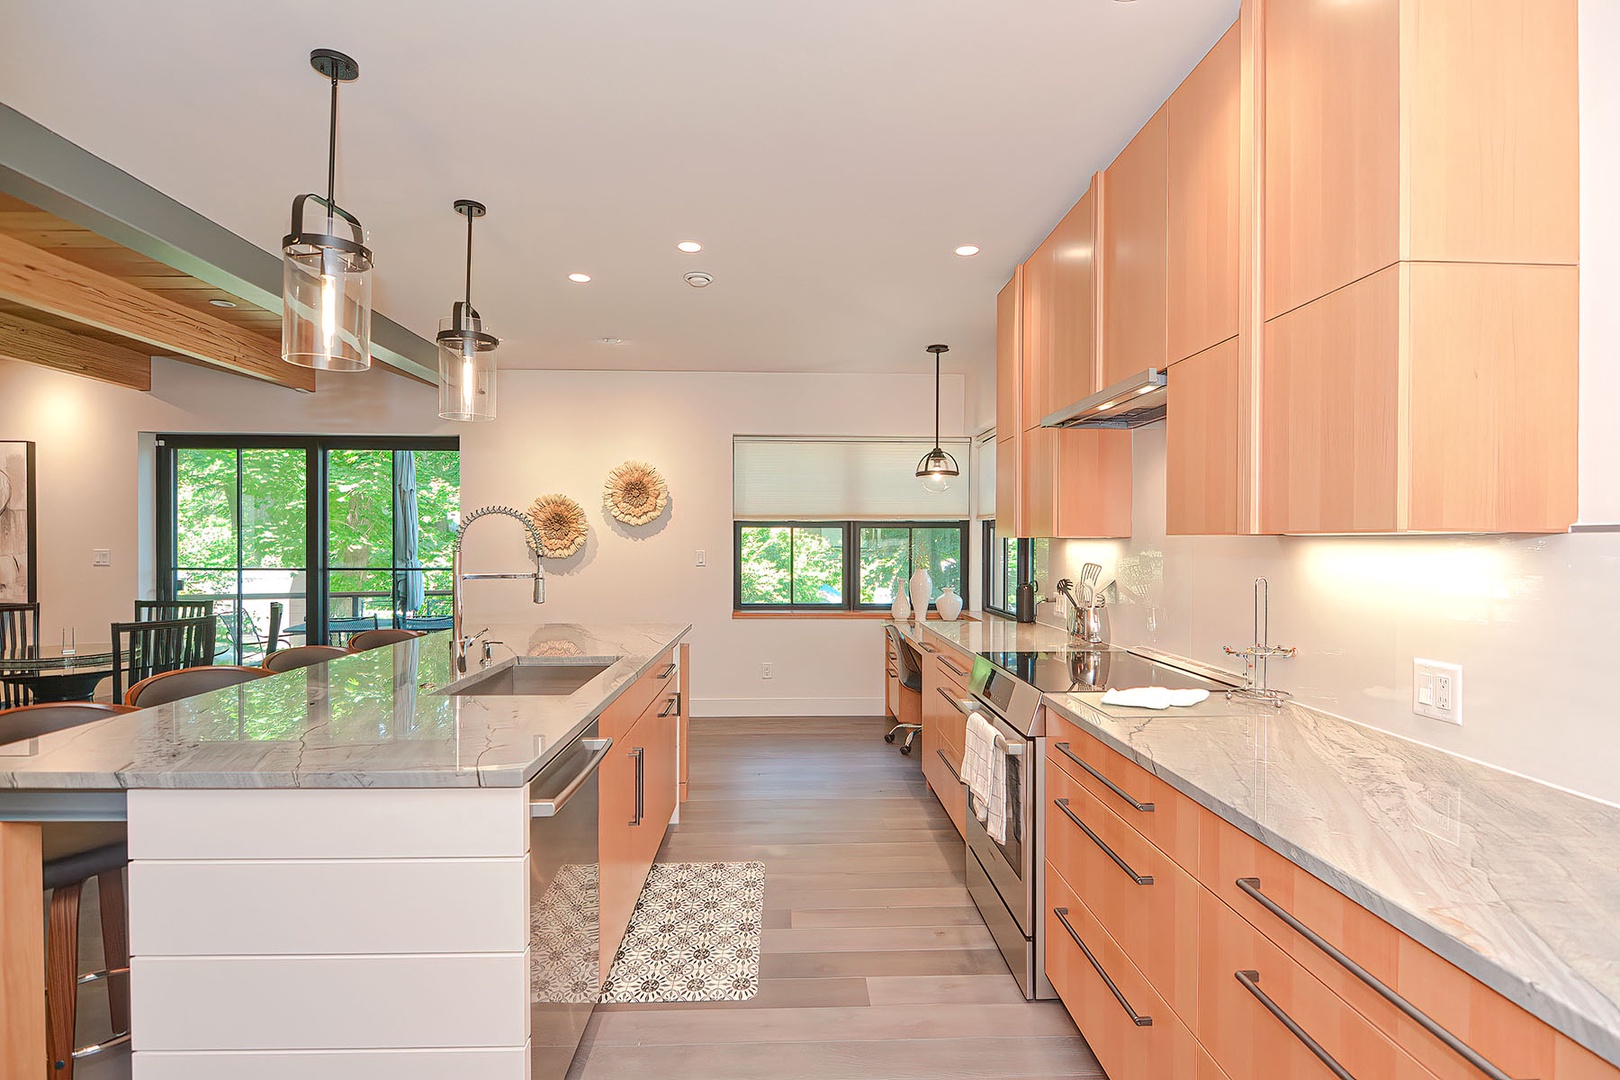 The center island features the sink, dishwasher, and plenty of prep space.